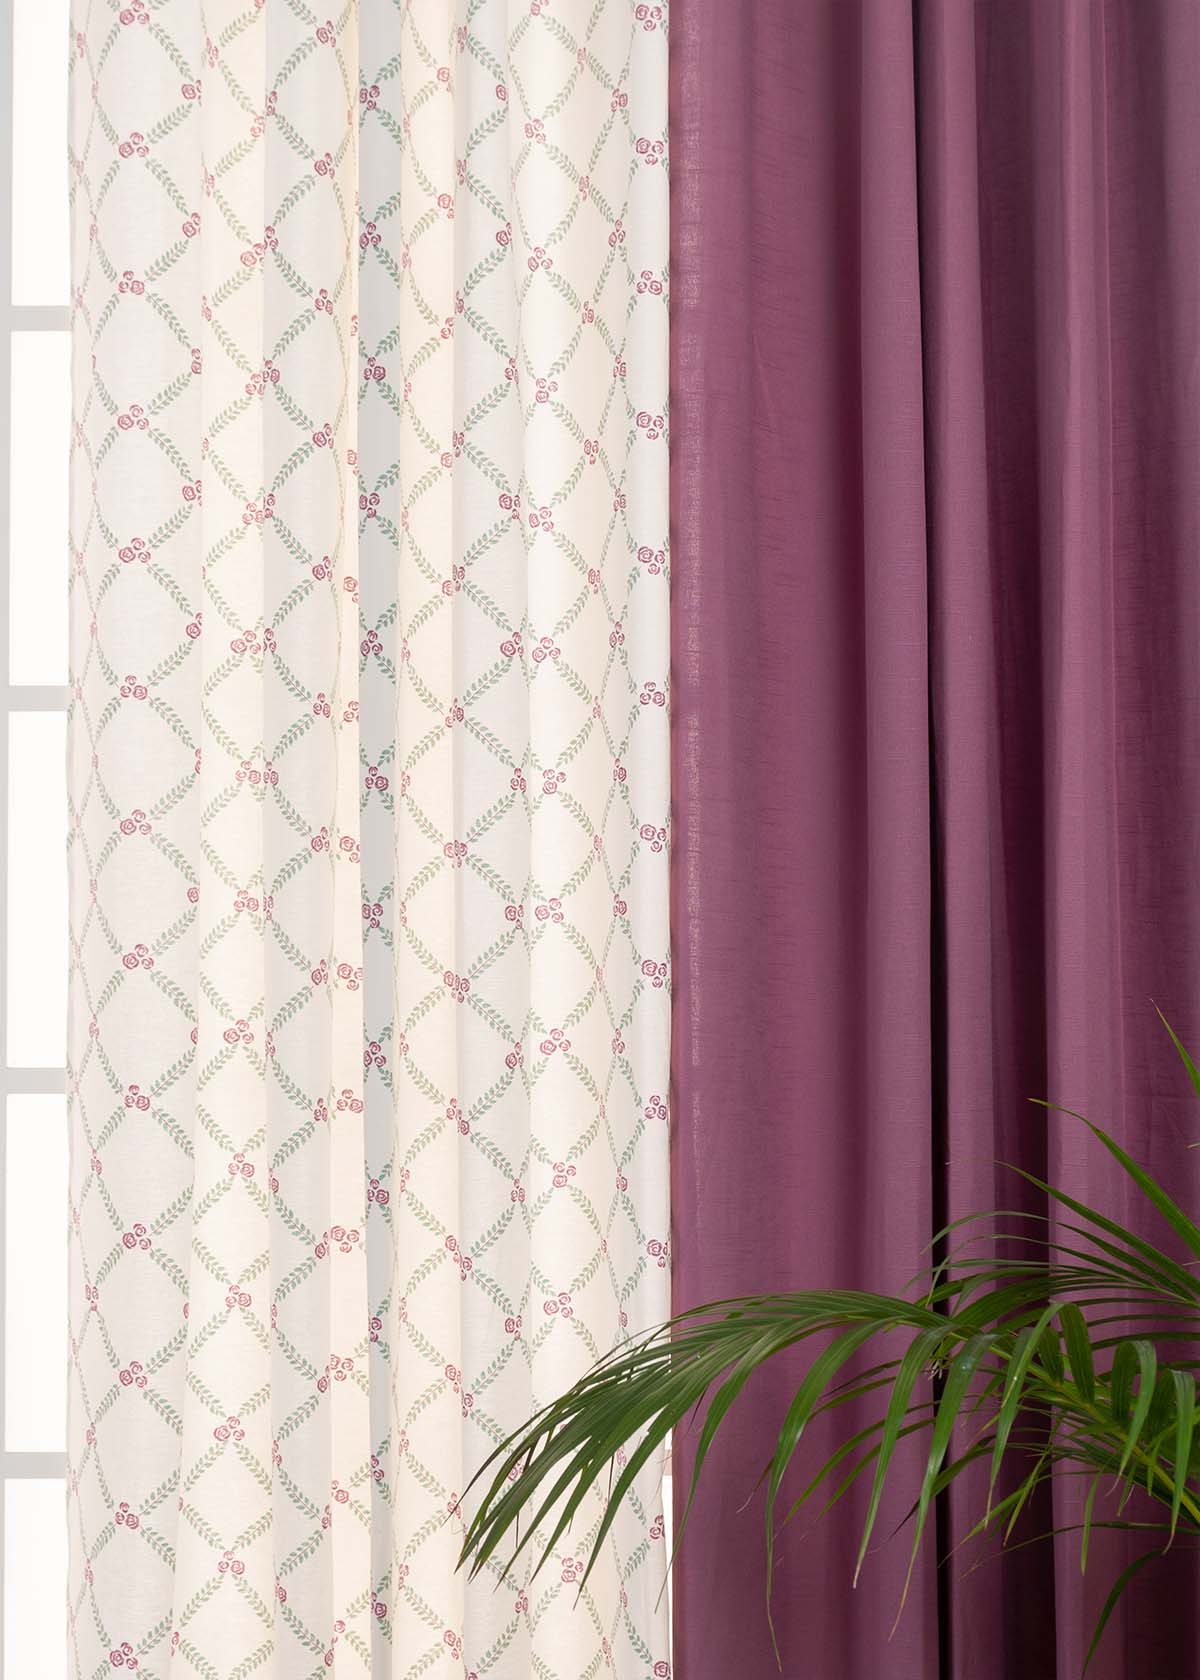 Grape Solid, Climbing Roses In Lavender Set of 4 Combo Cotton Curtain - Grape Lavender